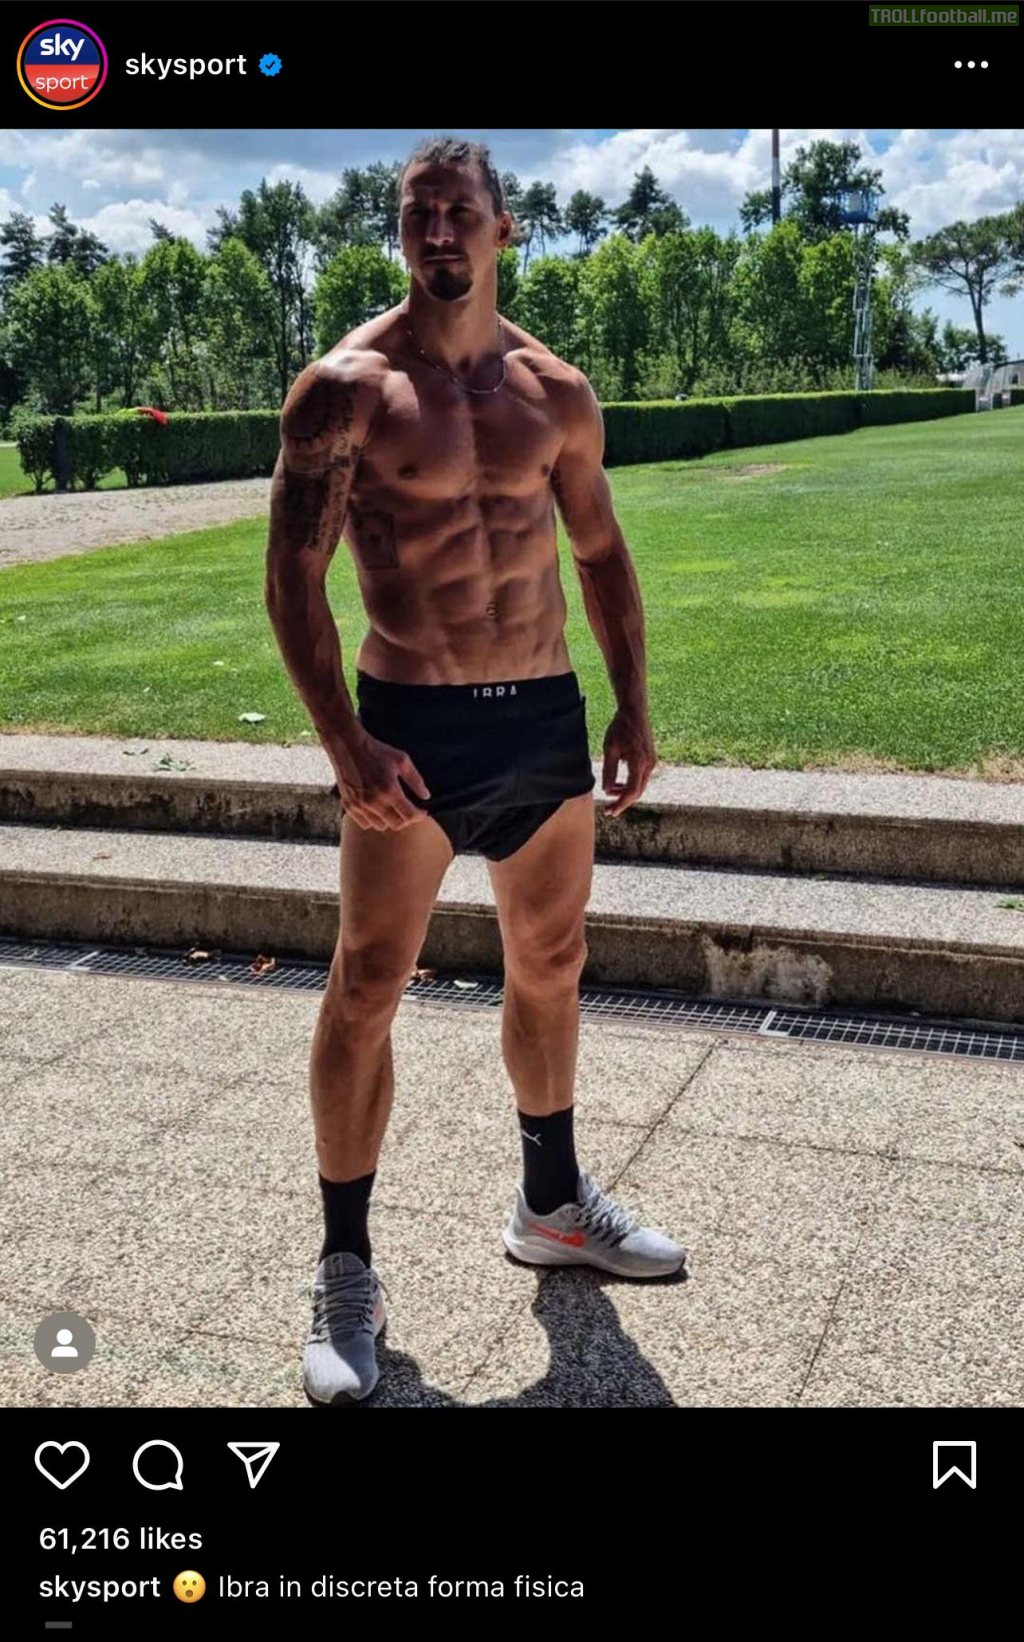 Ibrahimovic posts picture of impressive physique